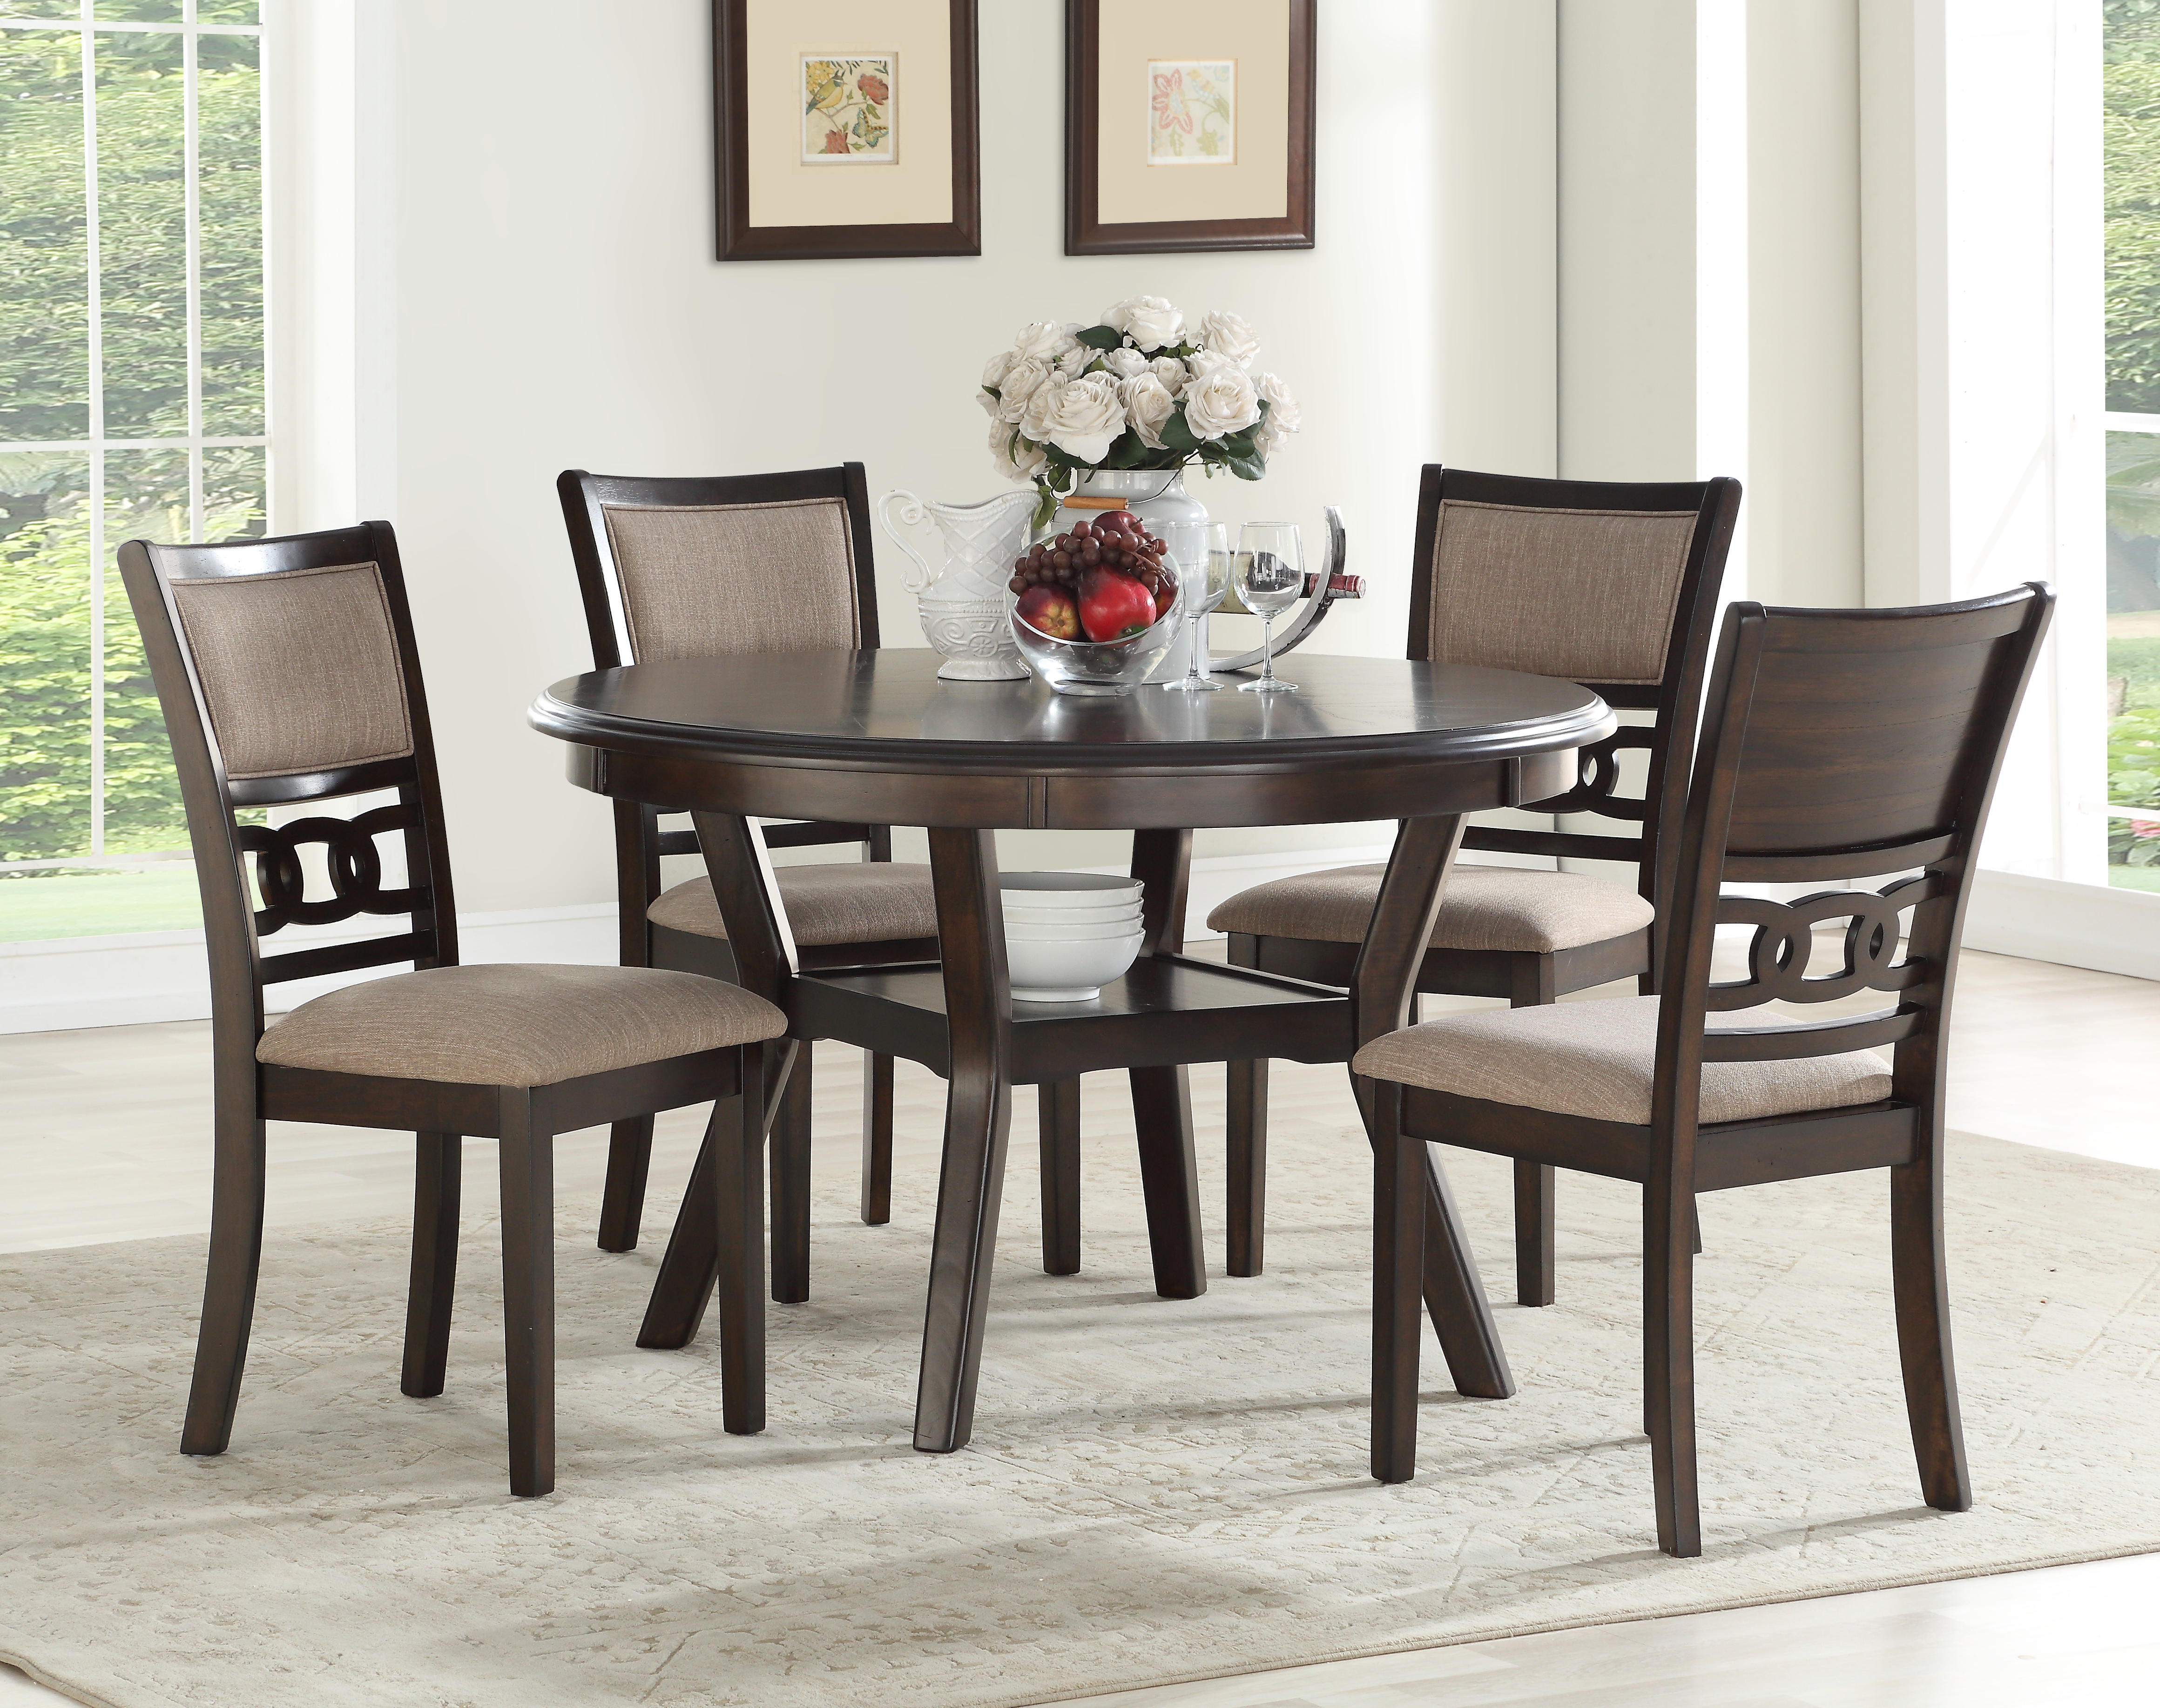 New Classic® Furniture Gia 5 Piece Cherry Dining Set